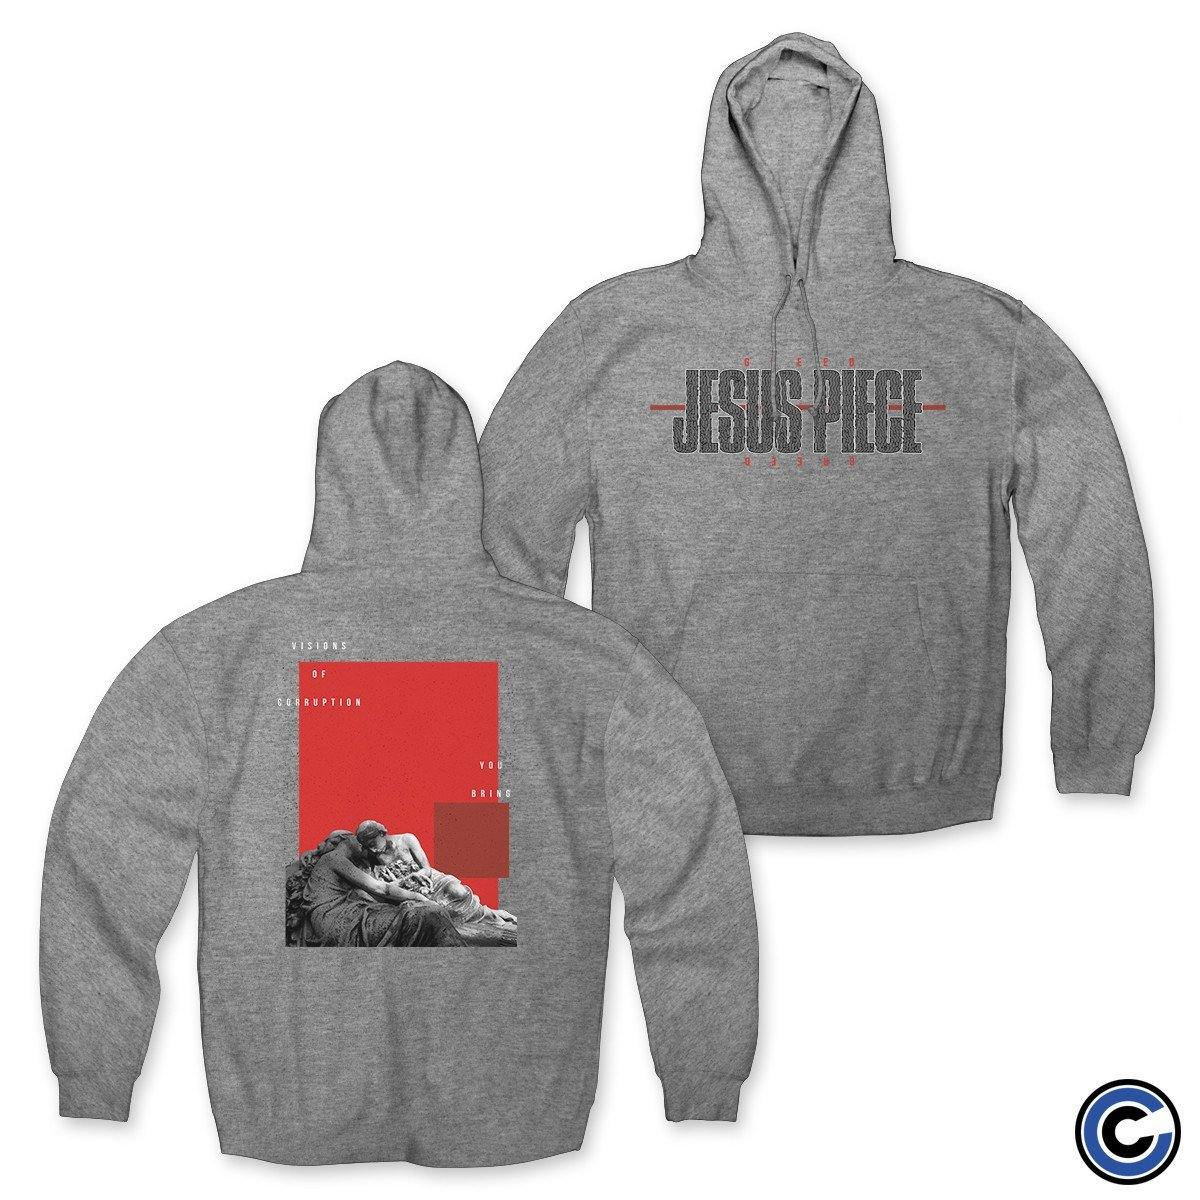 Buy – Jesus Piece "Greed" Hoodie – Band & Music Merch – Cold Cuts Merch